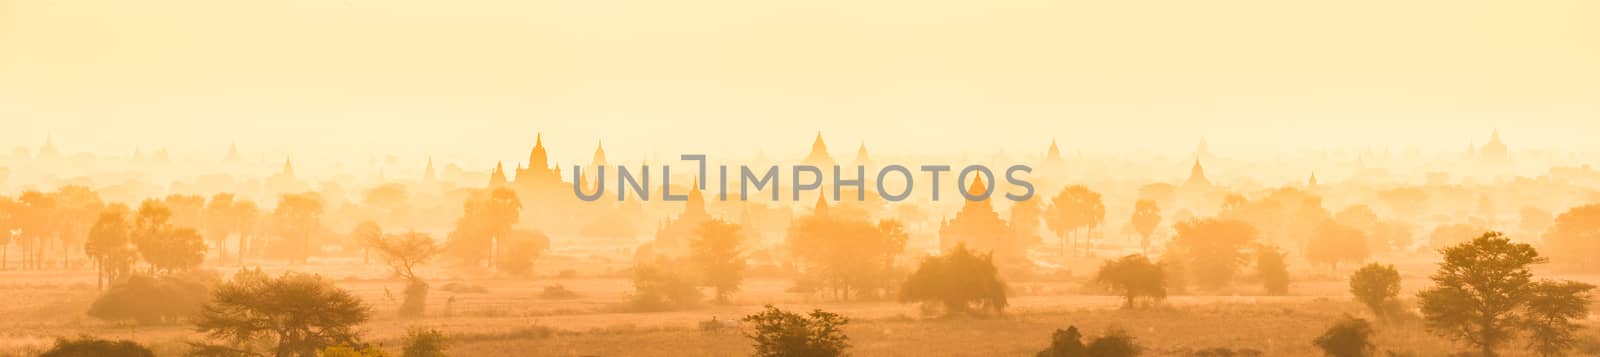 Temples of Bagan an ancient city located in the Mandalay Region of Burma, Myanmar, Asia. yellow toned. Thumbnail format. Vertical panoramic composition.